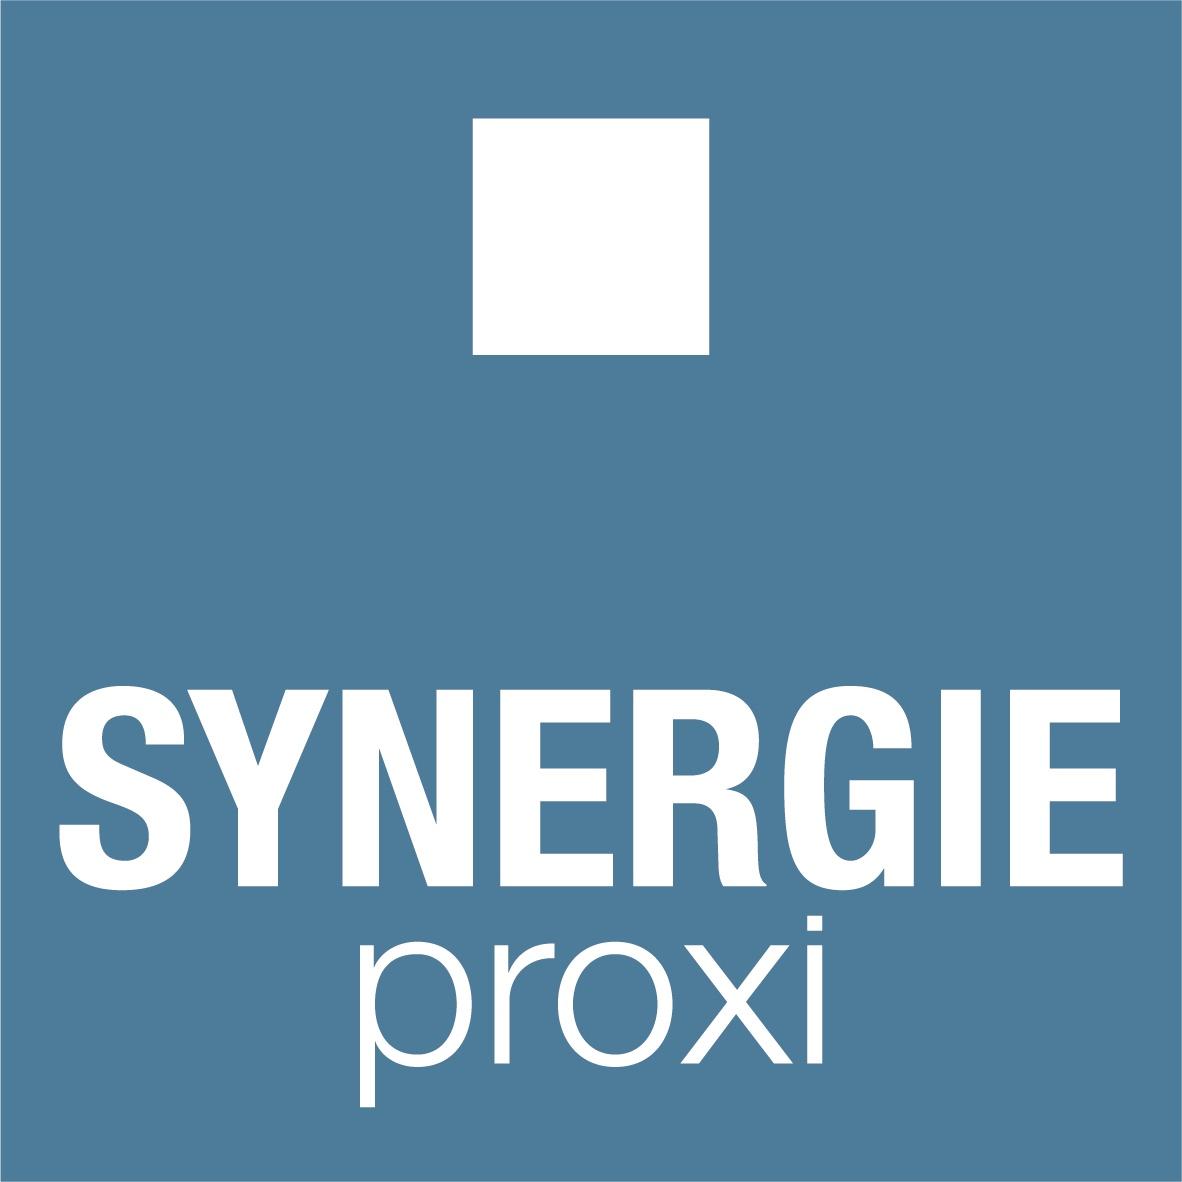 Synergie Bressuire